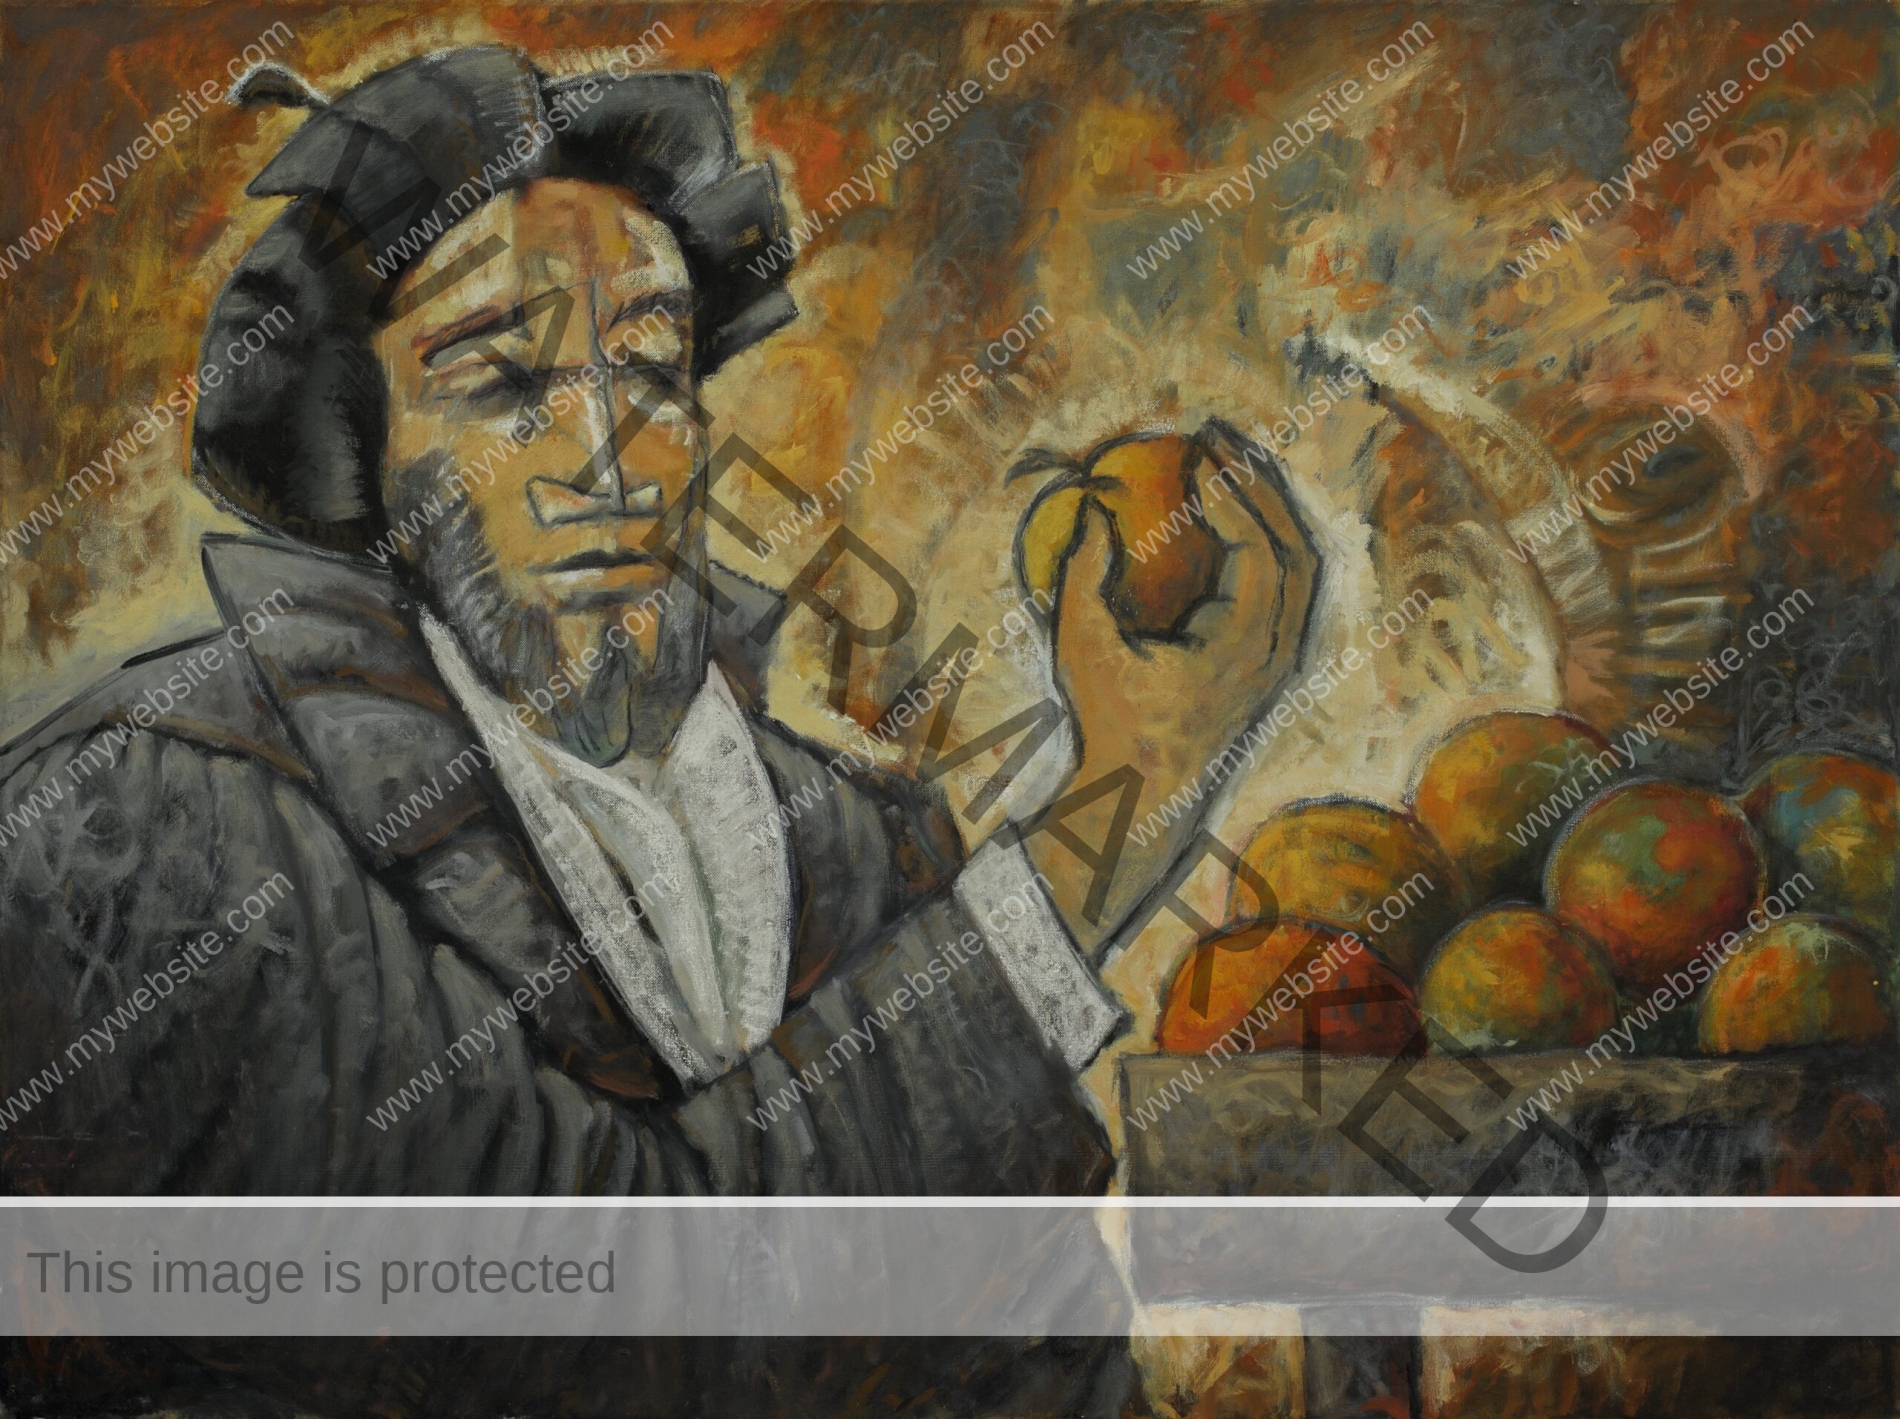 Hernán Cortés painting by Milo Gonzalez, featuring the Spanish historical figure known for his conquest of the Aztec Empire. He is featured having just plucked an apple from a bowl of apples, symbolising his greed.